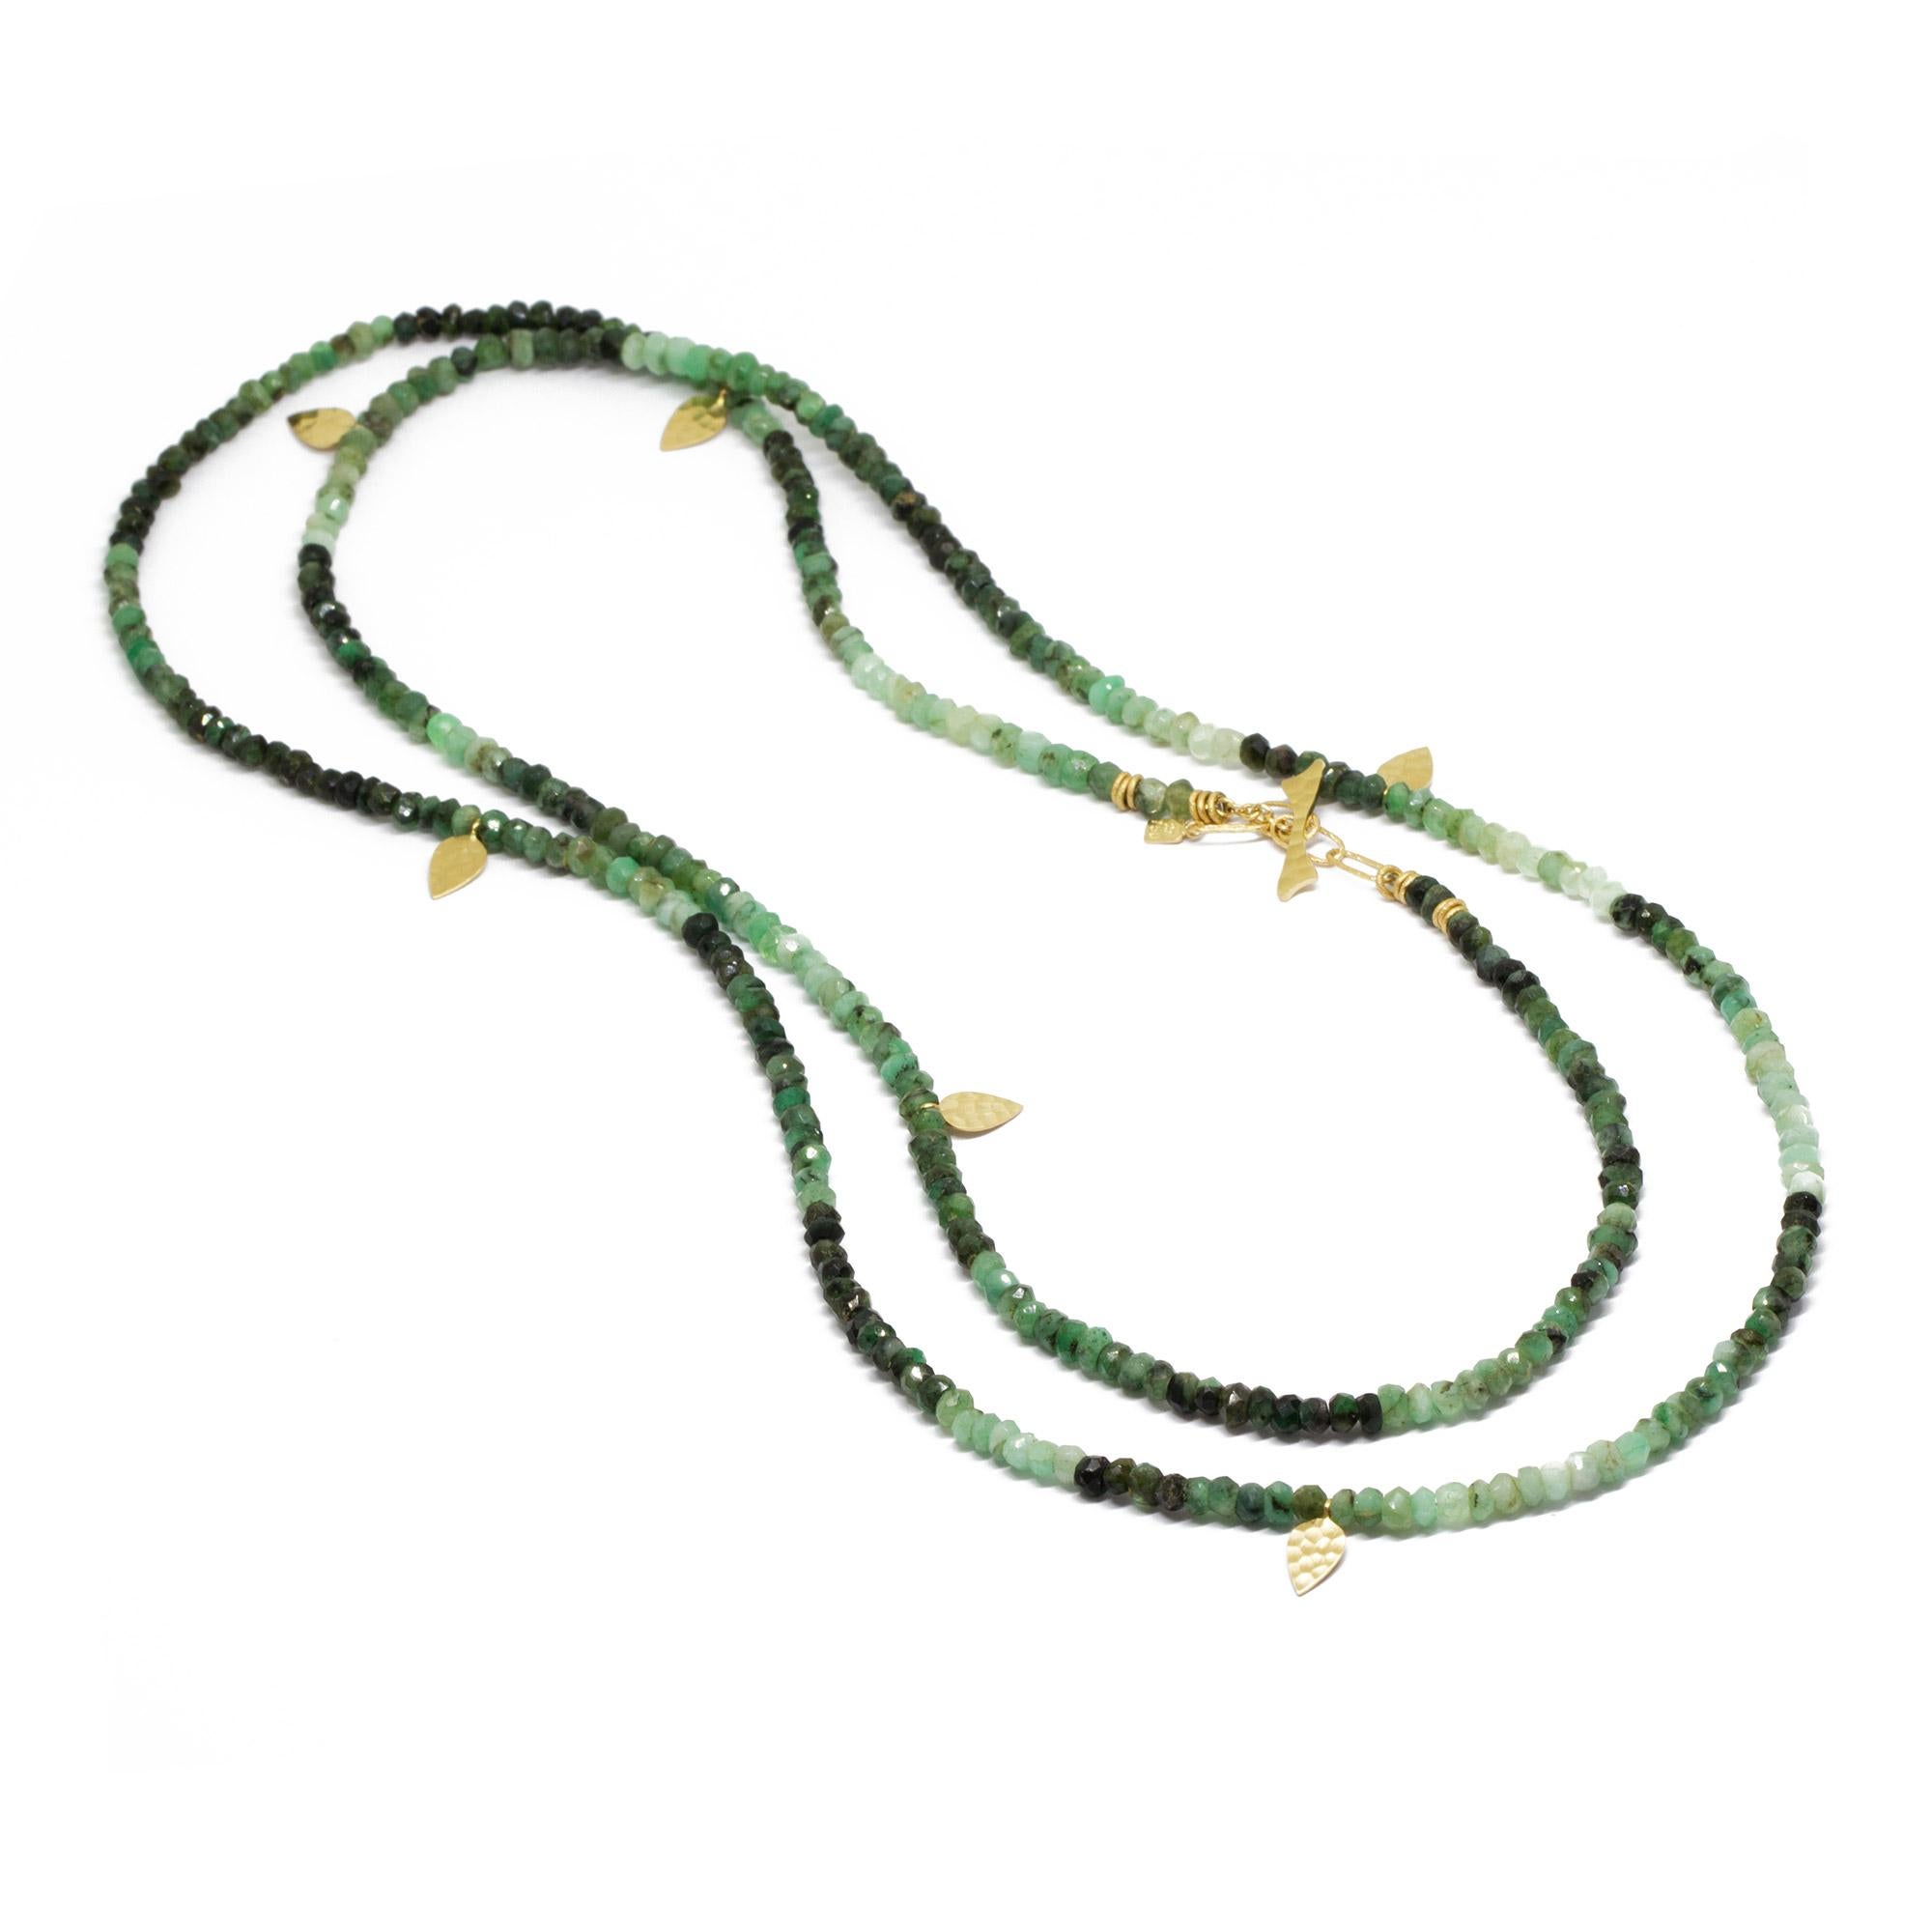 The best part about our Heritage Shaded Emerald Necklette isn’t just that it can be worn long, doubled-up, or as a wrap bracelet (although that’s pretty cool). It’s that you can thread any of our Charms onto the emerald beads—have fun playing with